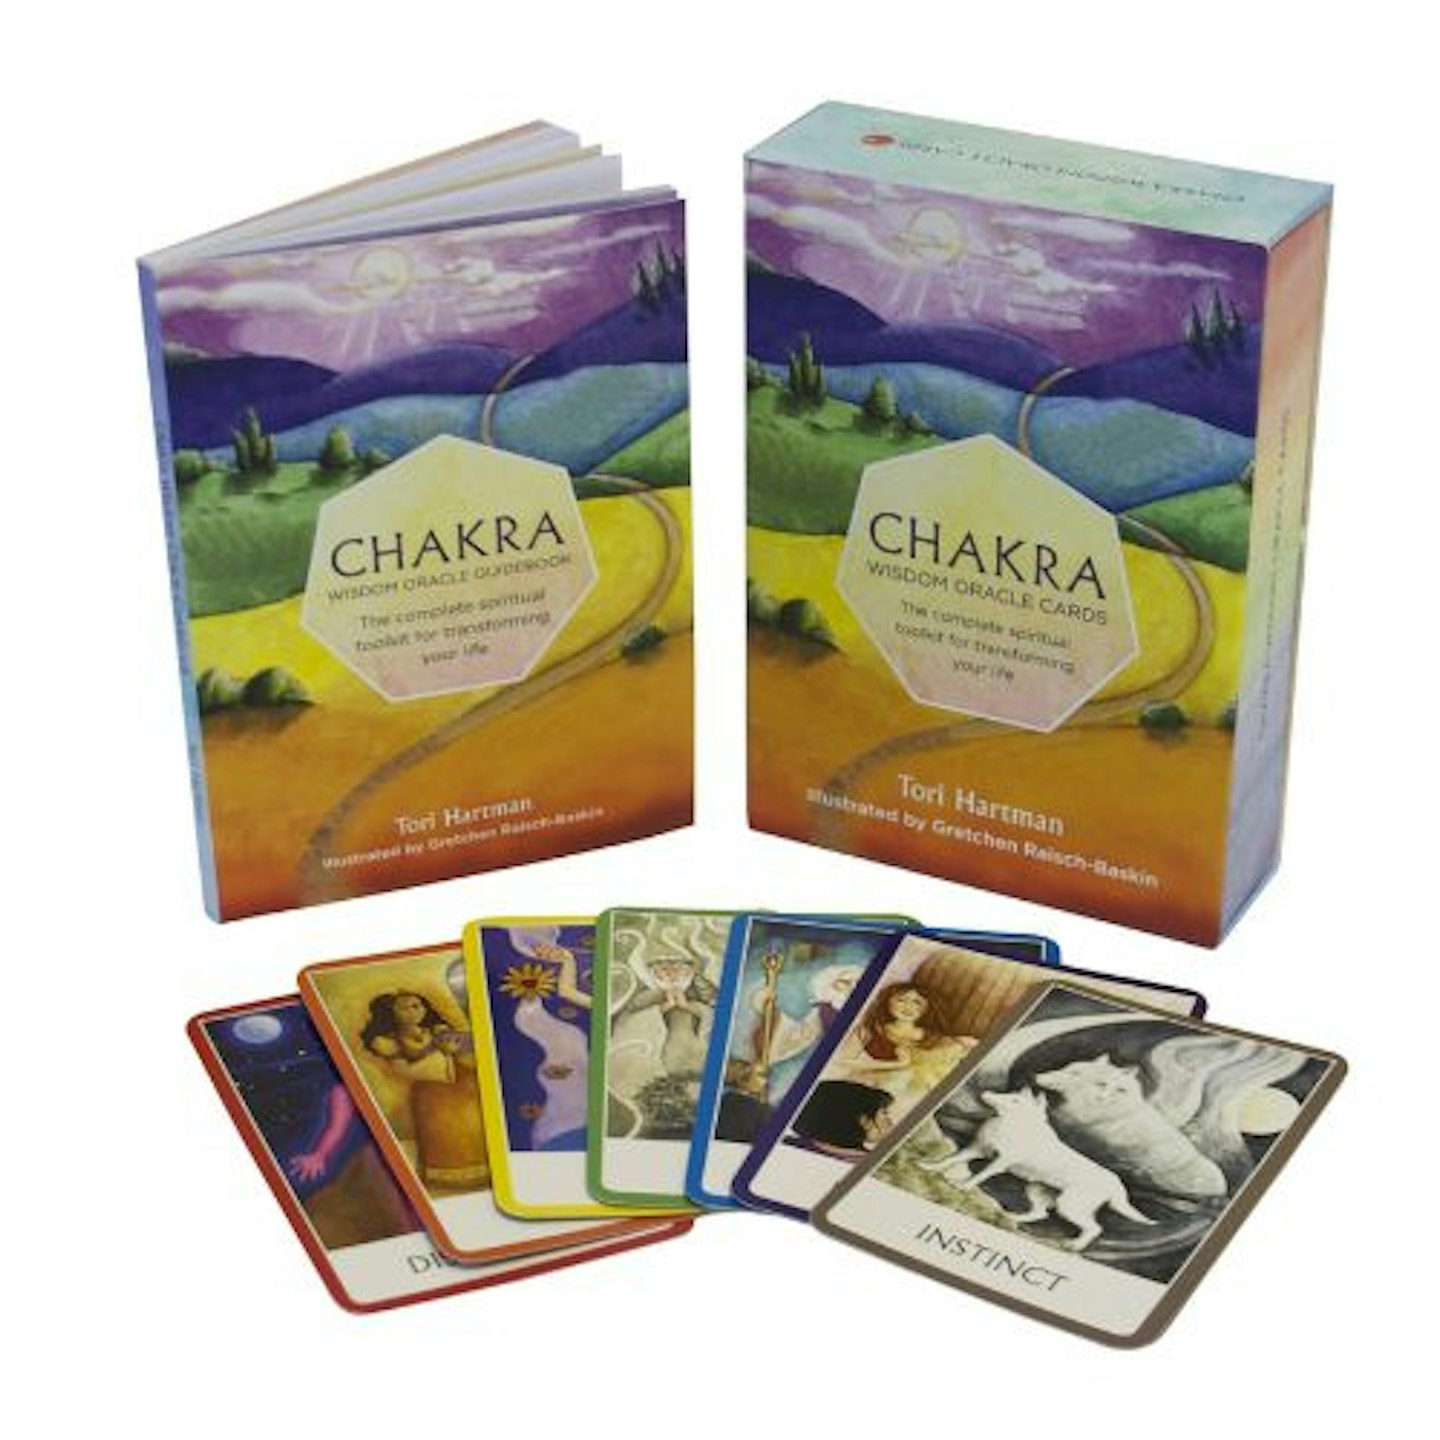 Chakra Wisdom Oracle Cards: The Complete Spiritual Toolkit for Transforming Your Life Cards